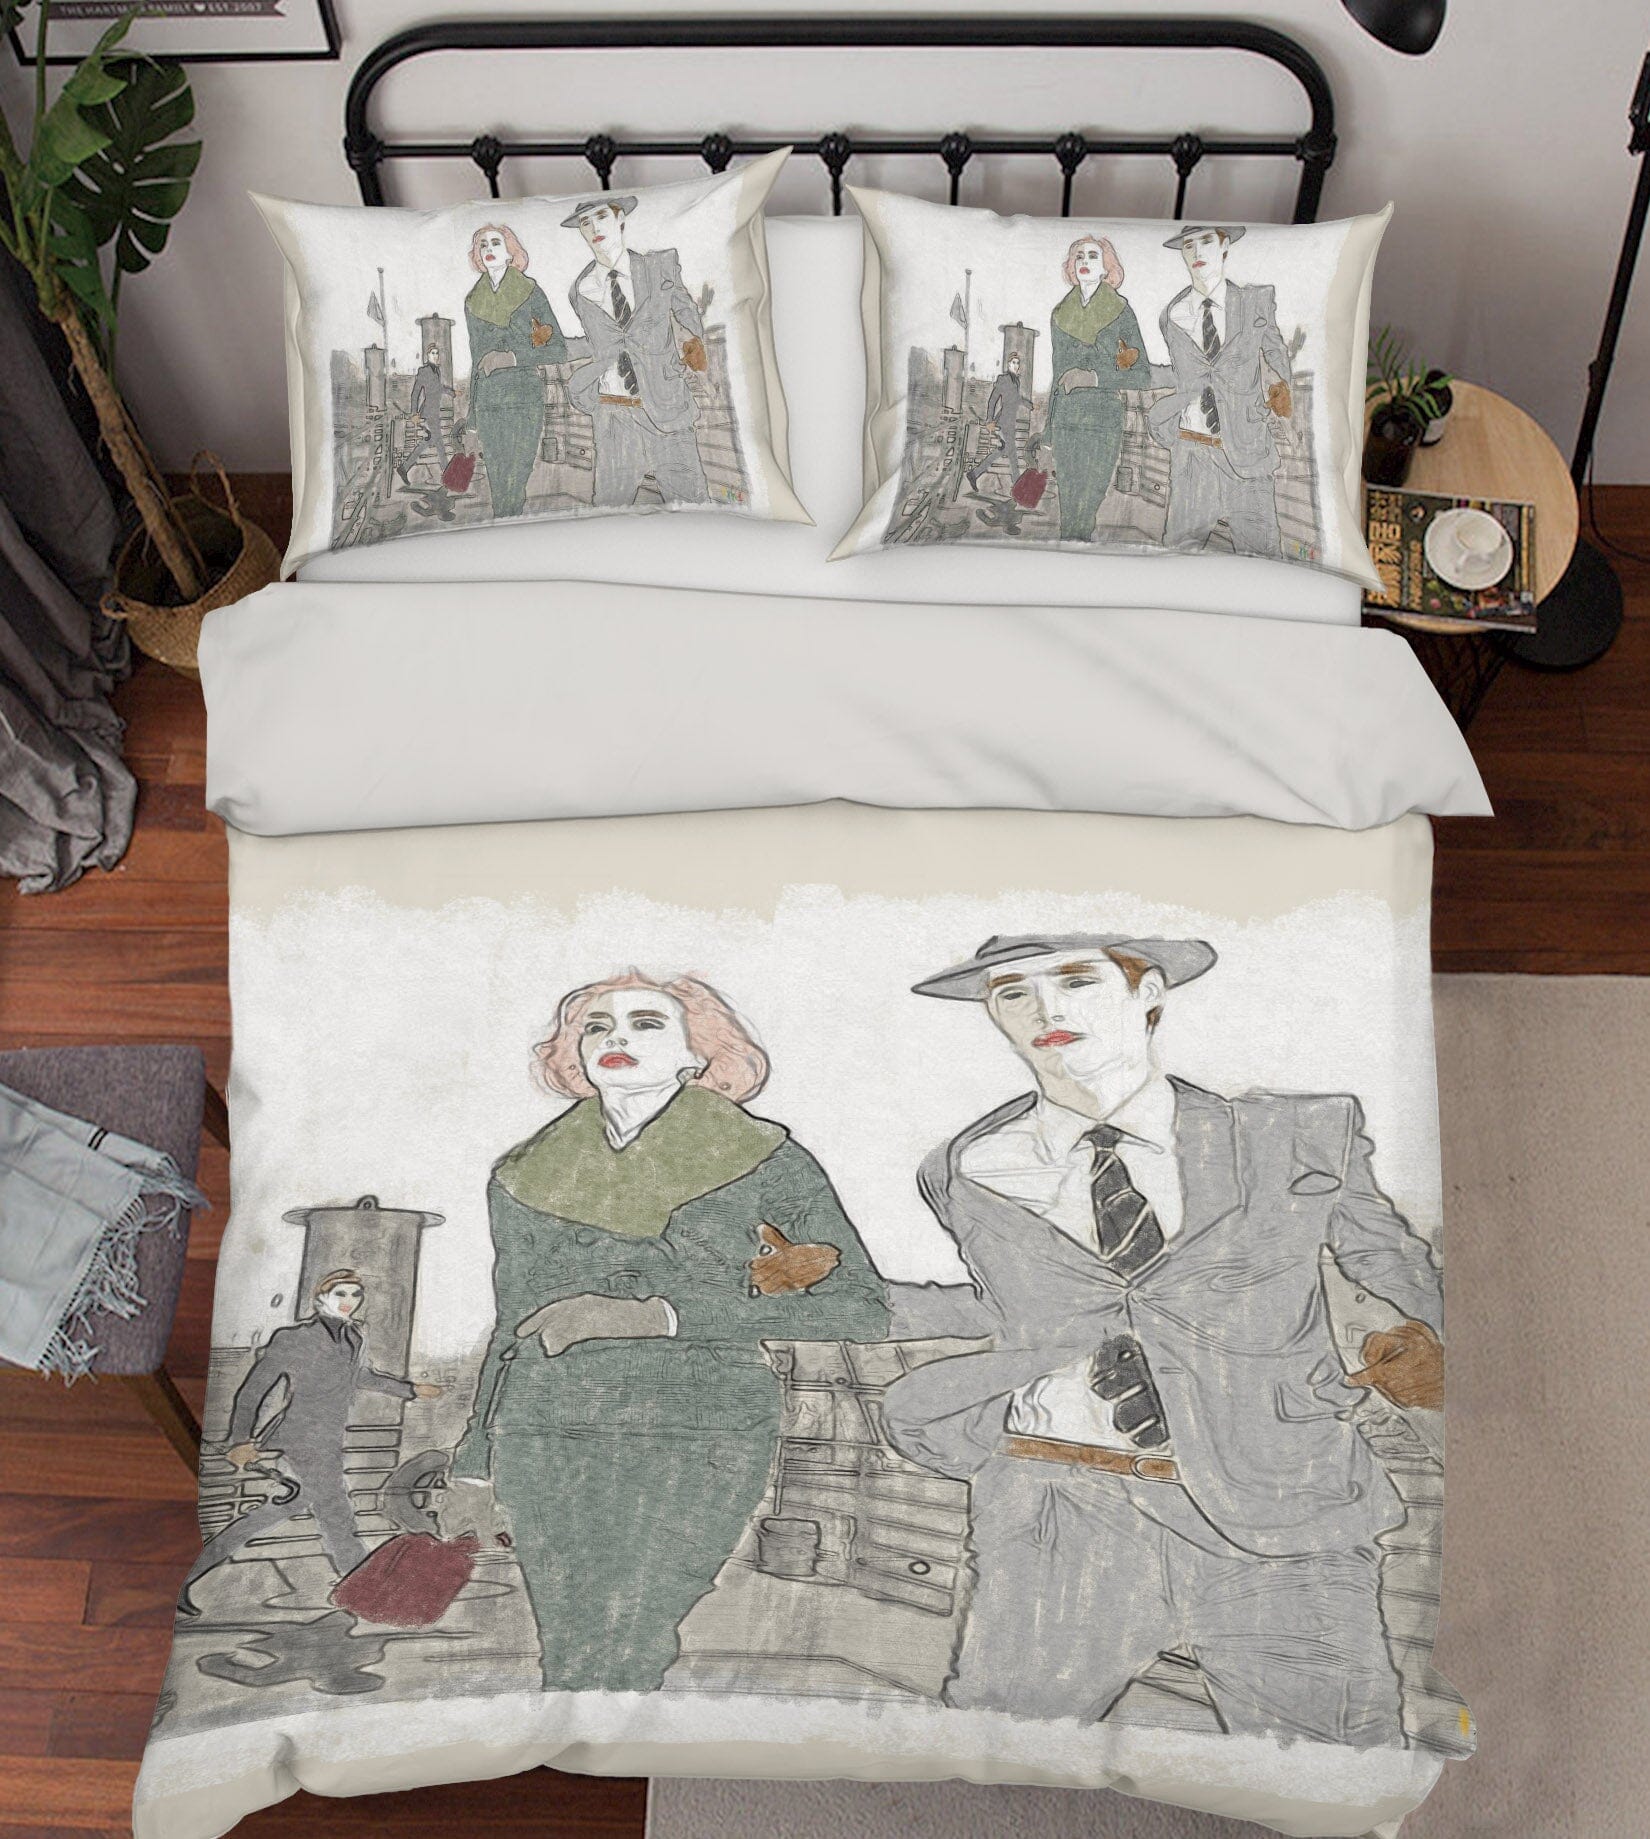 3D Couple Dating 2007 Marco Cavazzana Bedding Bed Pillowcases Quilt Quiet Covers AJ Creativity Home 